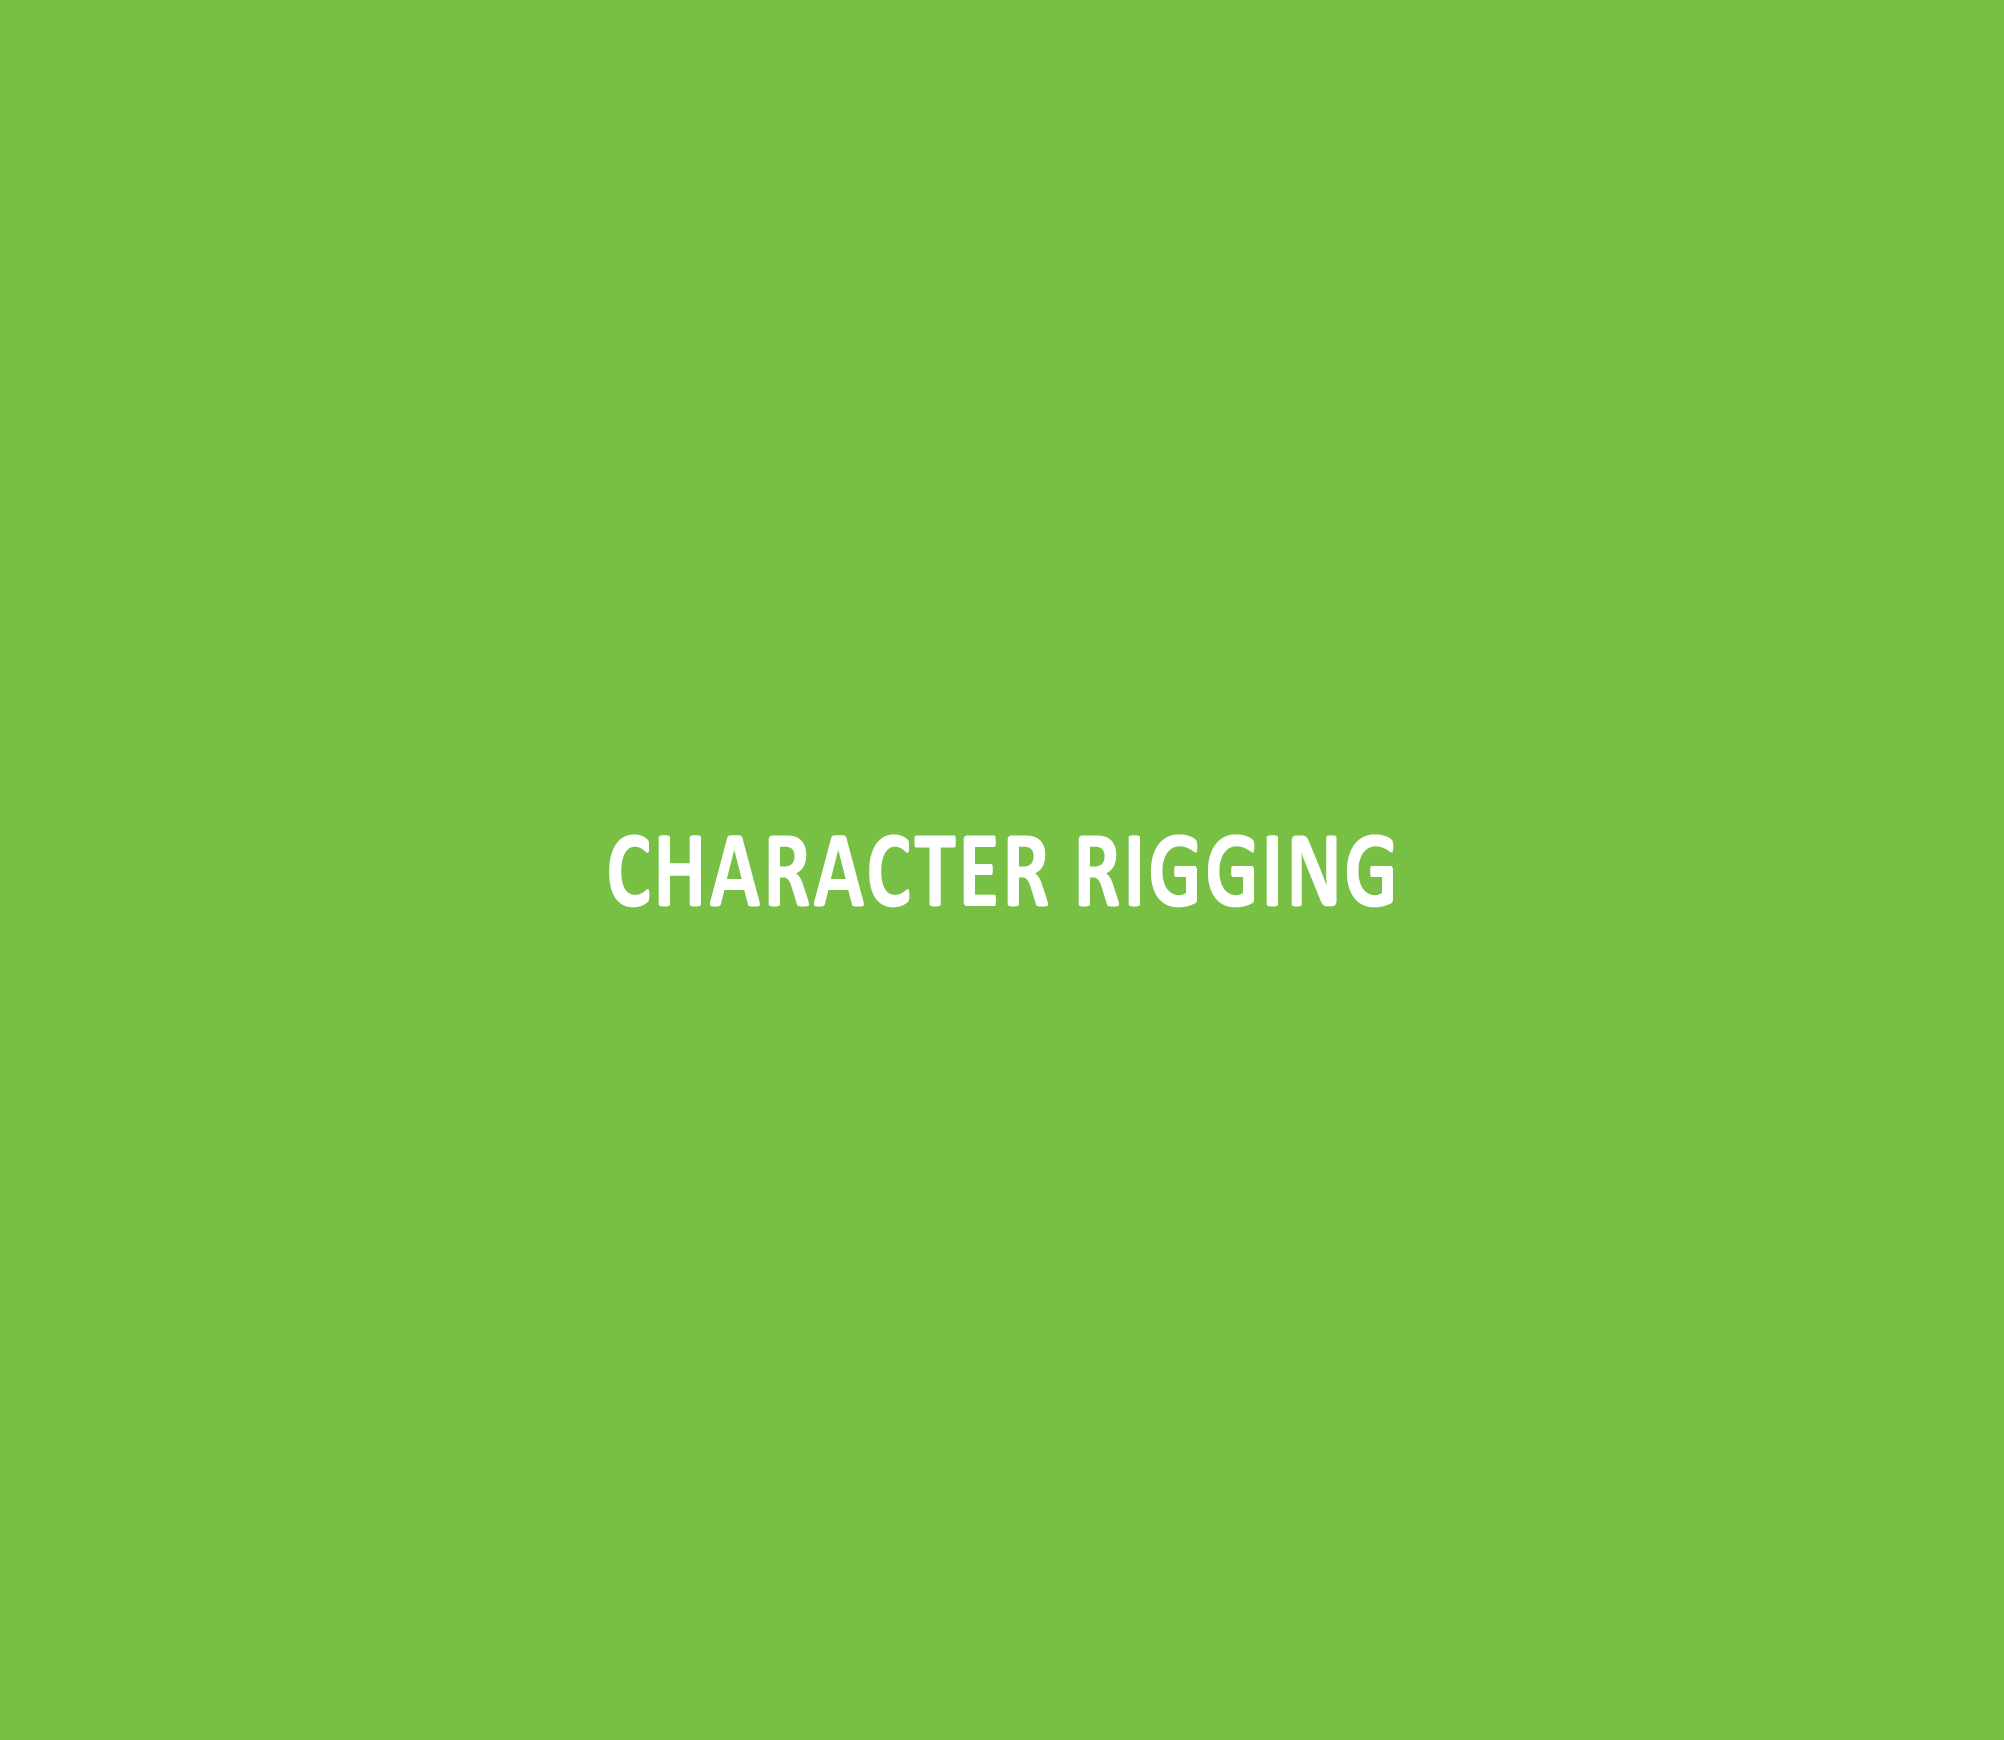 Character Rigging